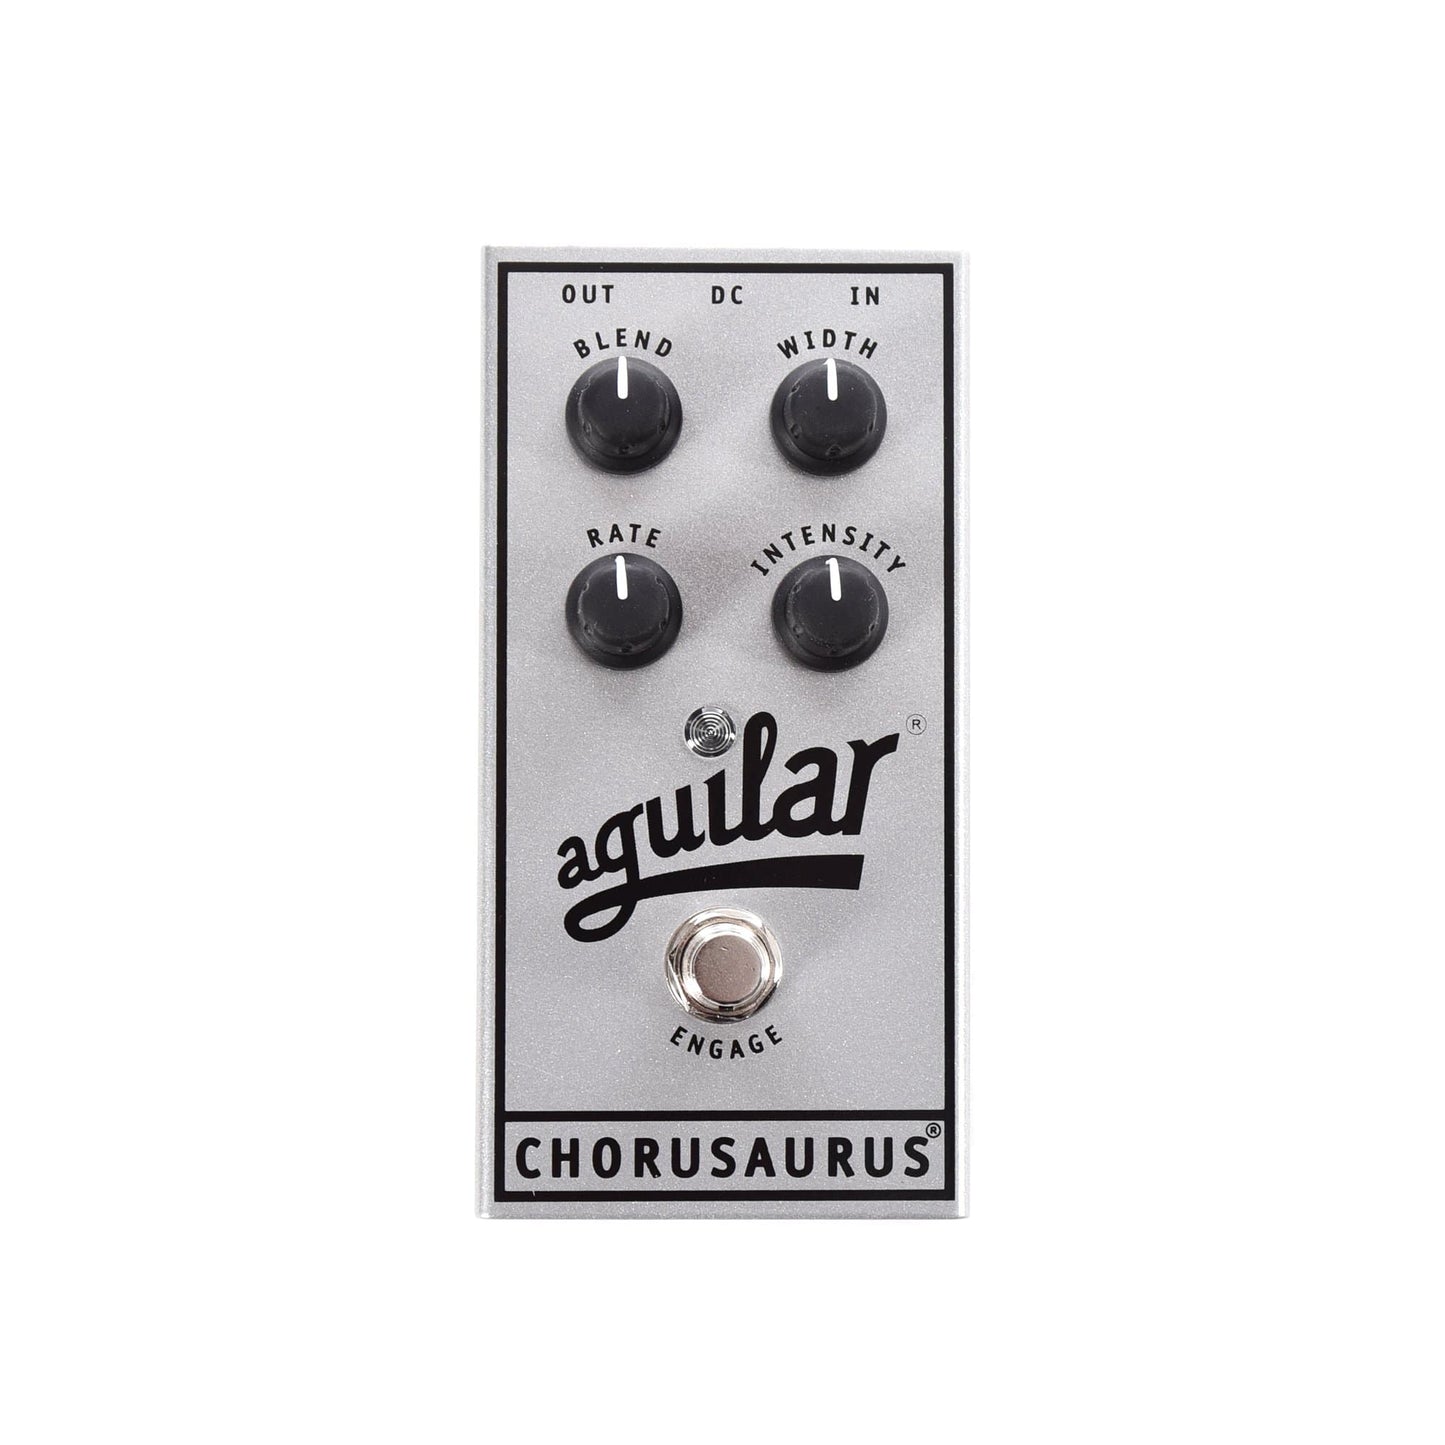 Aguilar 25th Silver Anniversary Edition Chorusaurus Effects and Pedals / Chorus and Vibrato